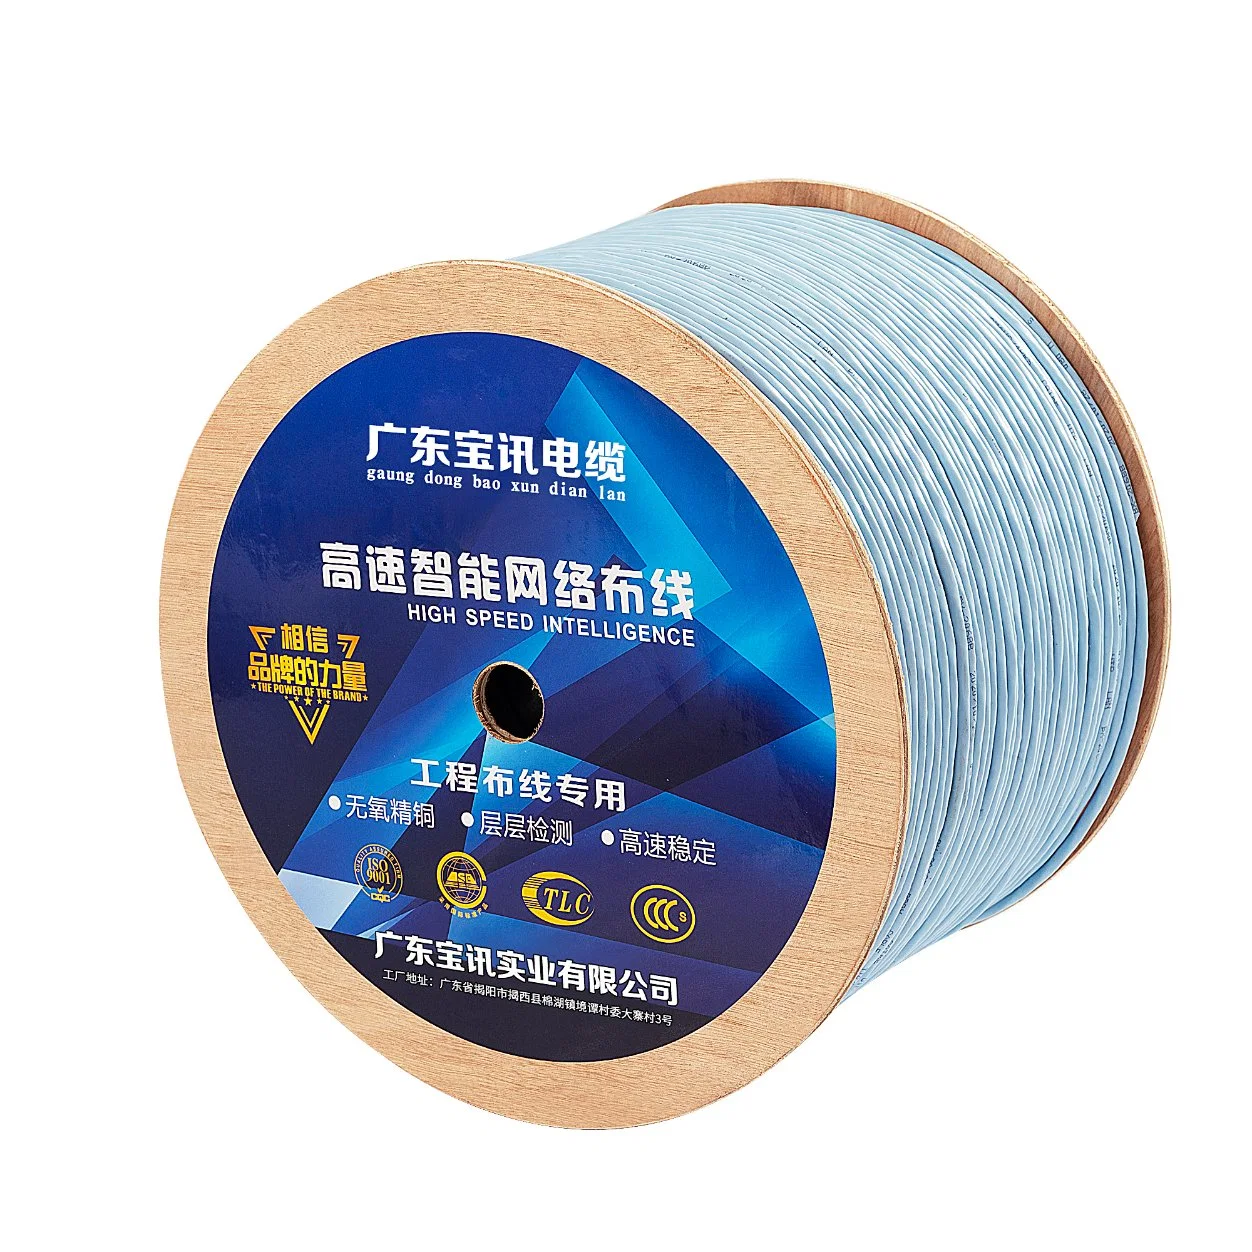 1000FT Roll 305m 23AWG 24AWG PVC CAT6 UTP Ethernet LAN Network Electric Wire Cable with Competitive Price